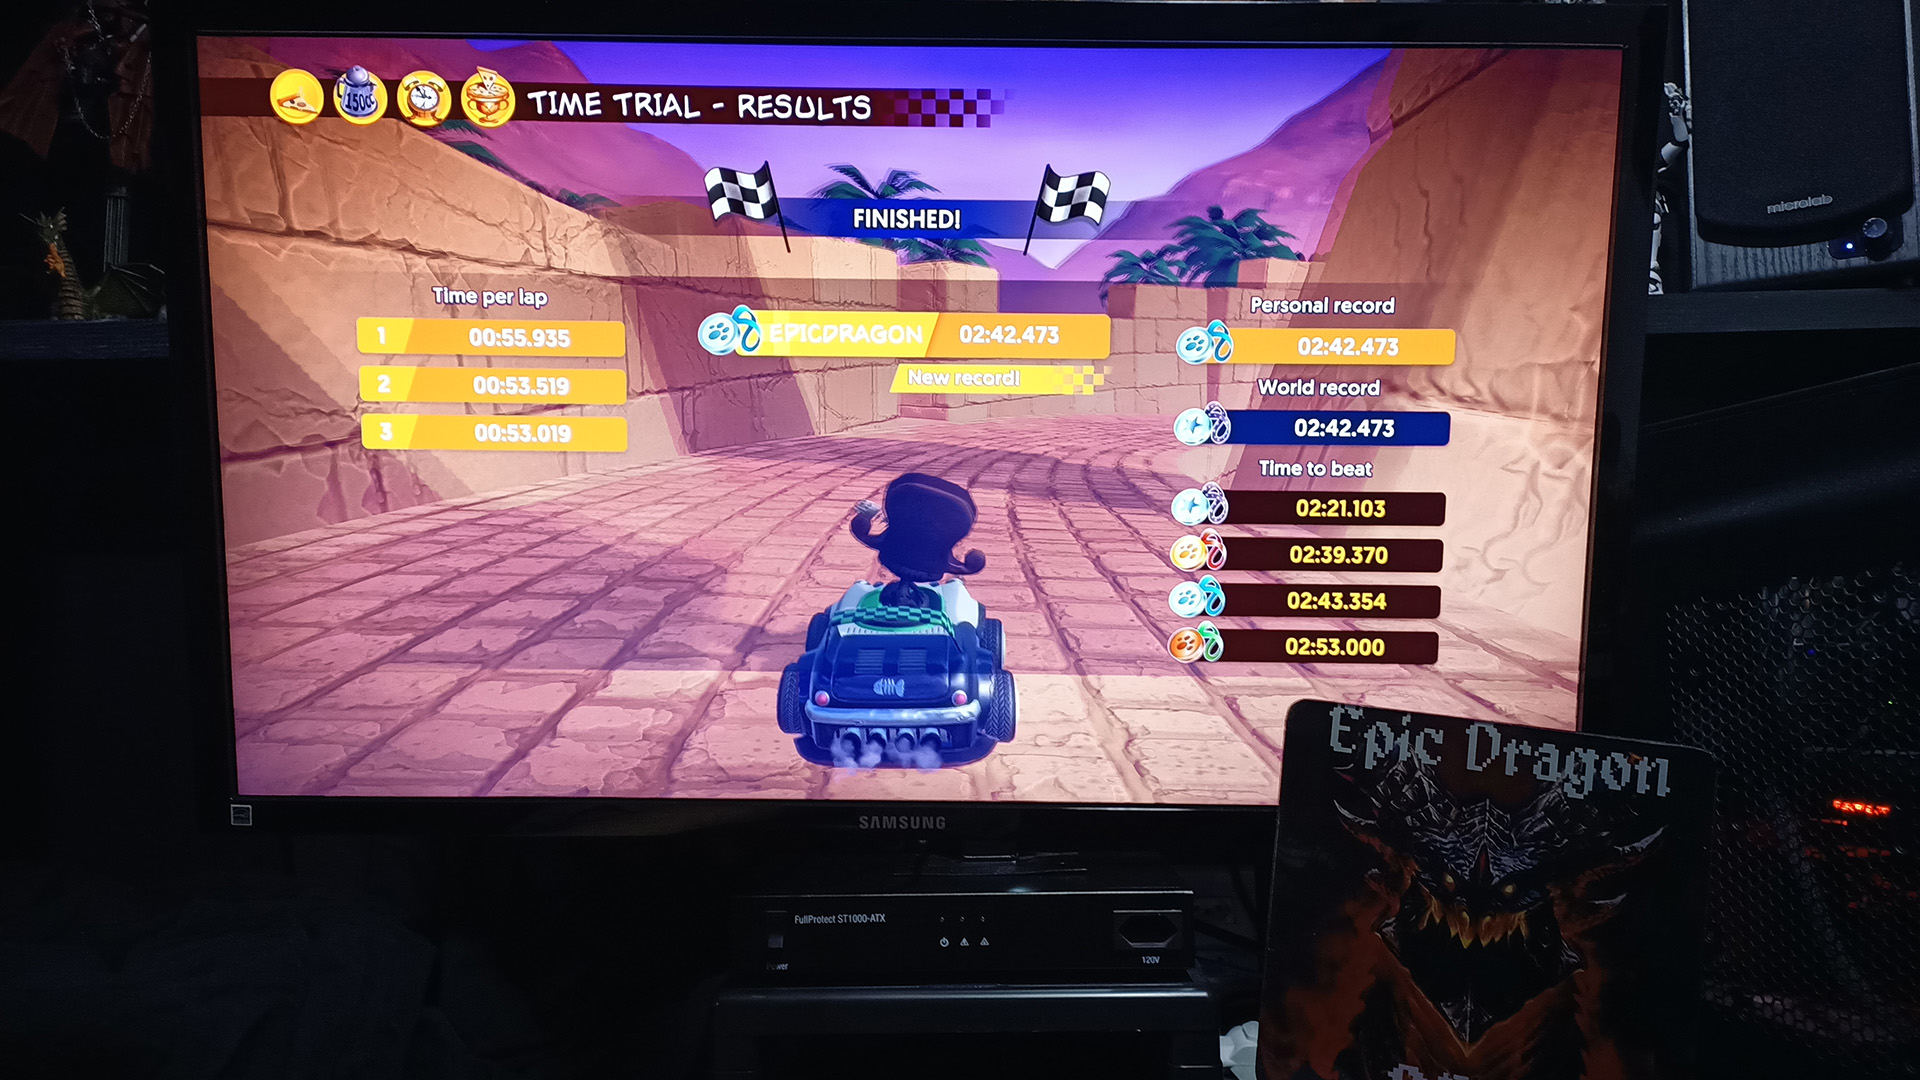 EpicDragon: Garfield Kart Furious Racing: Valley Of The Kings [Time Trial: 3 Laps] (PC) 0:02:42.473 points on 2022-08-14 15:03:54